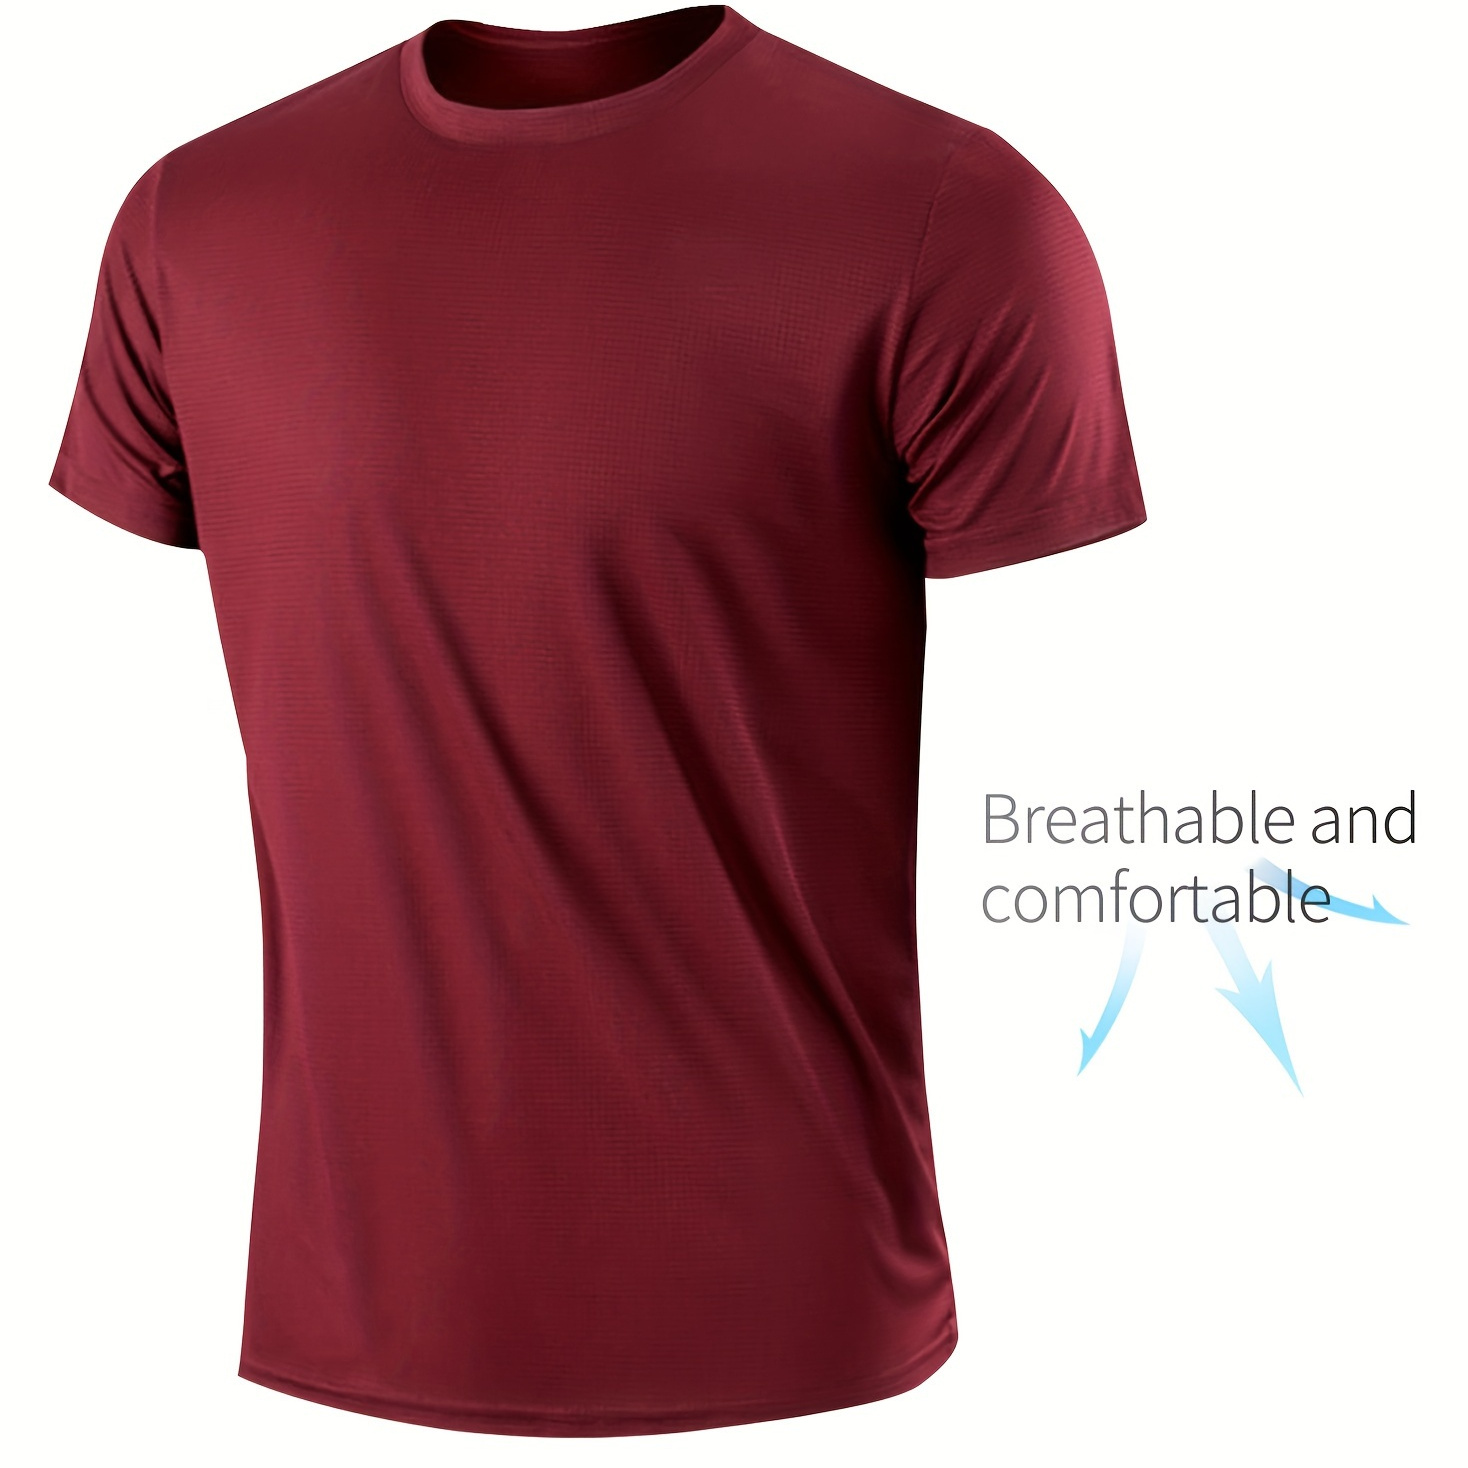 

Men's Ultra-thin Quick-dry Athletic Shirt, Fashionable Lightweight Breathable Casual Sports Fitness T-shirt, Moisture-wicking Short Sleeve Top, Gym Wear